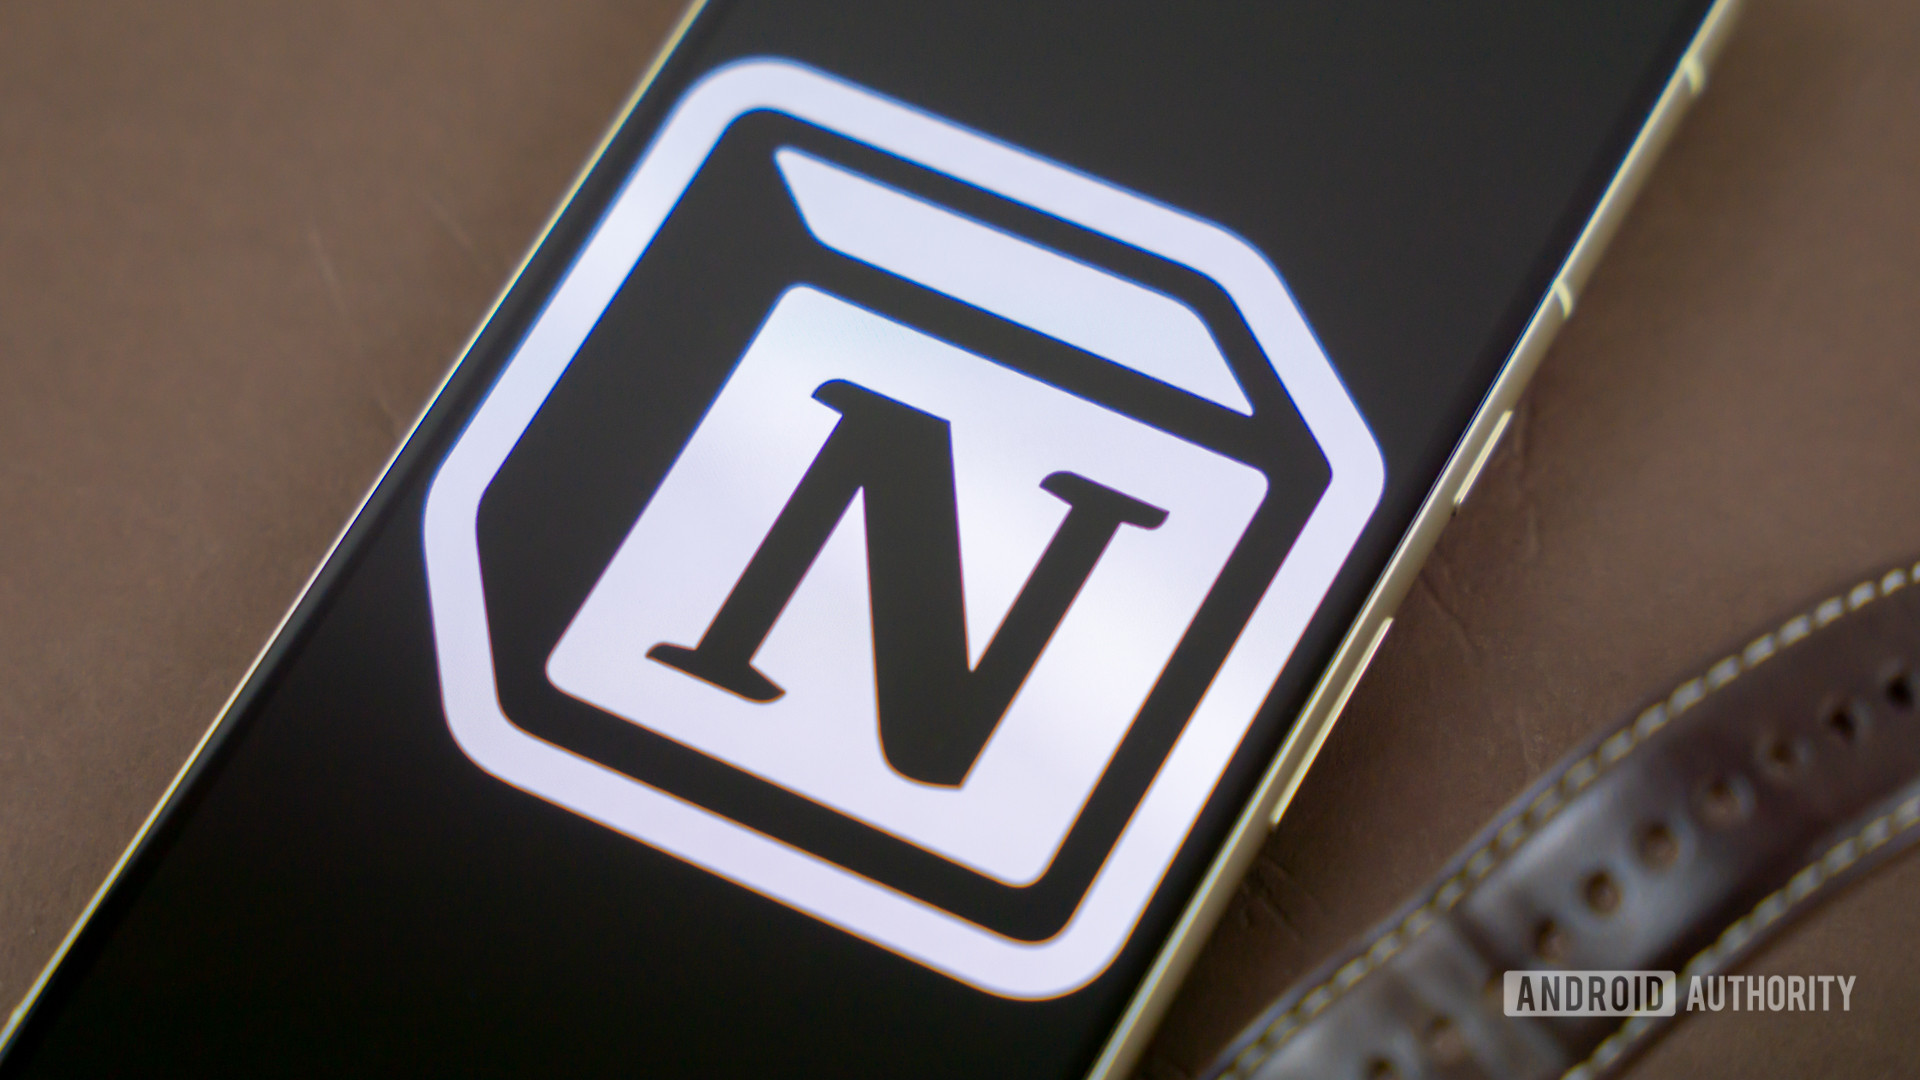 Notion logo on snartphone next to other office products Stock photo 5